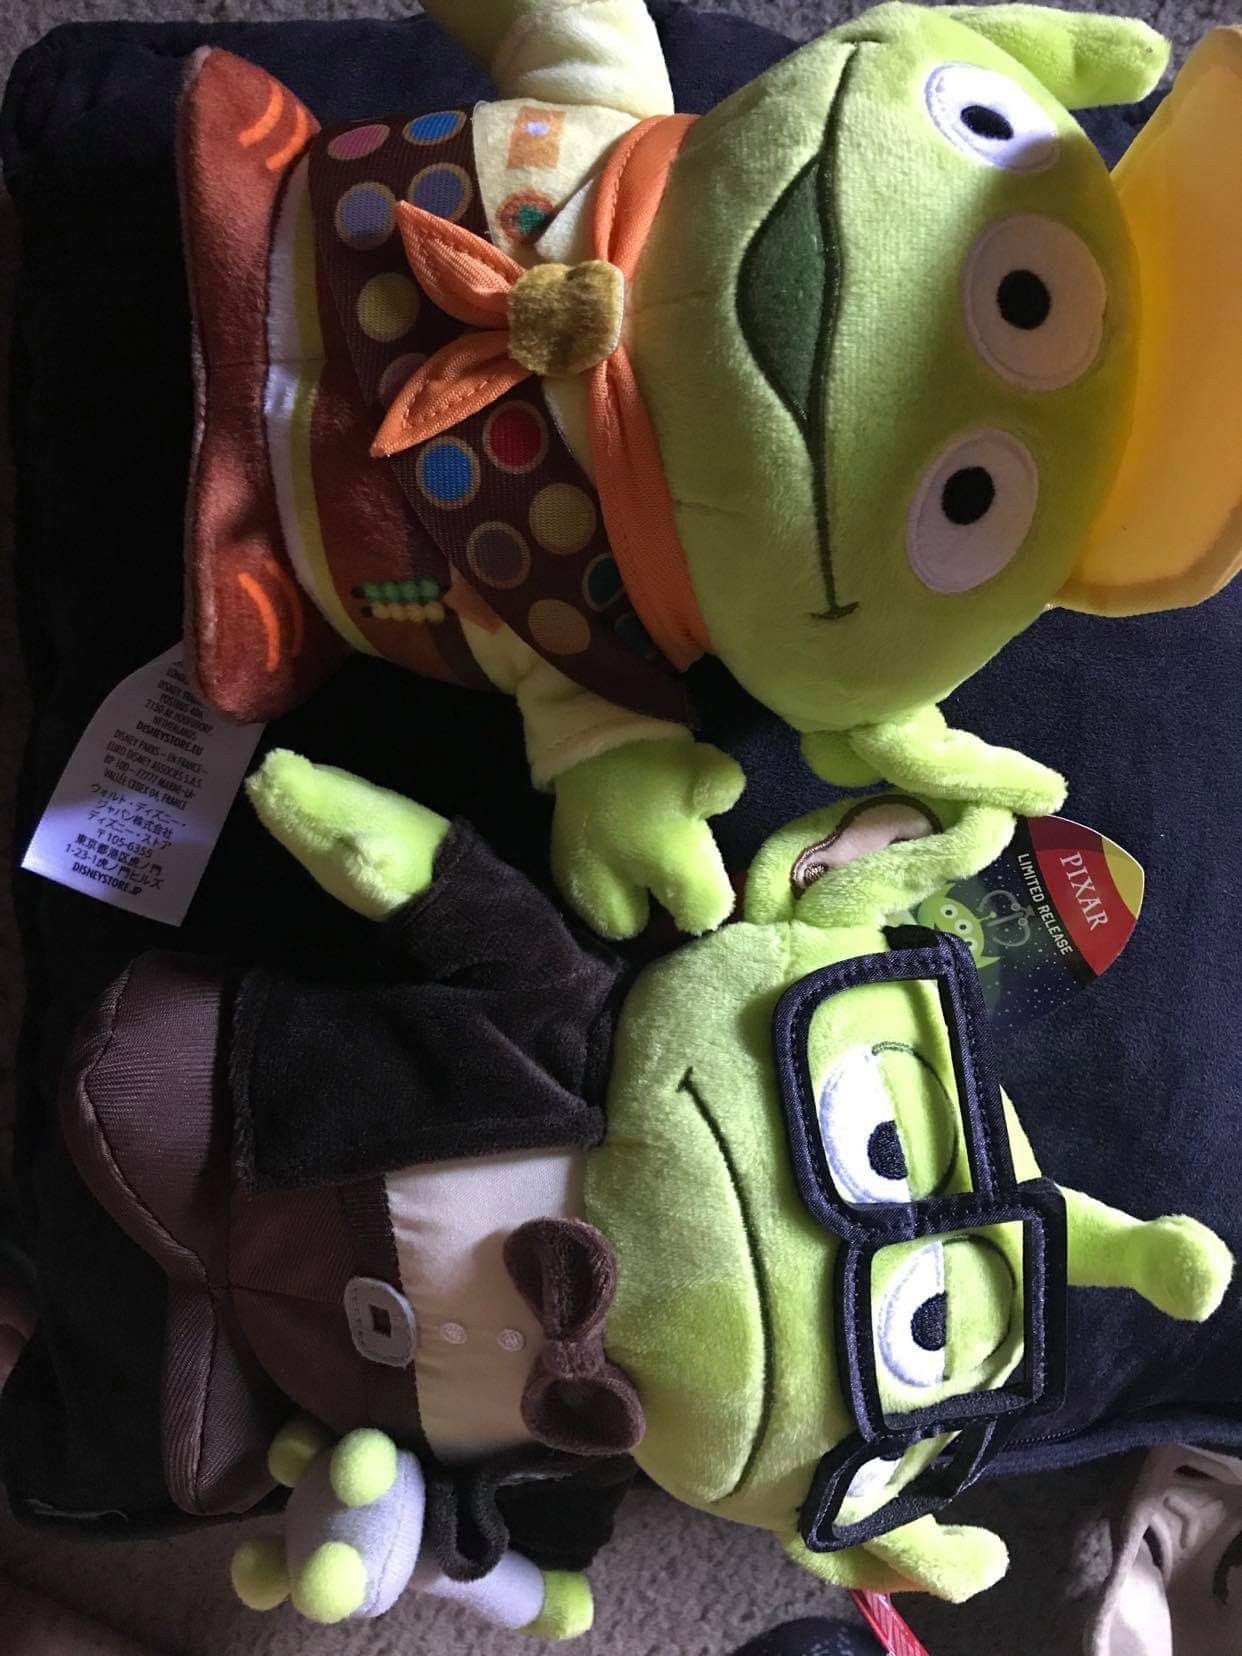 Alien as Carl and Russell plushies